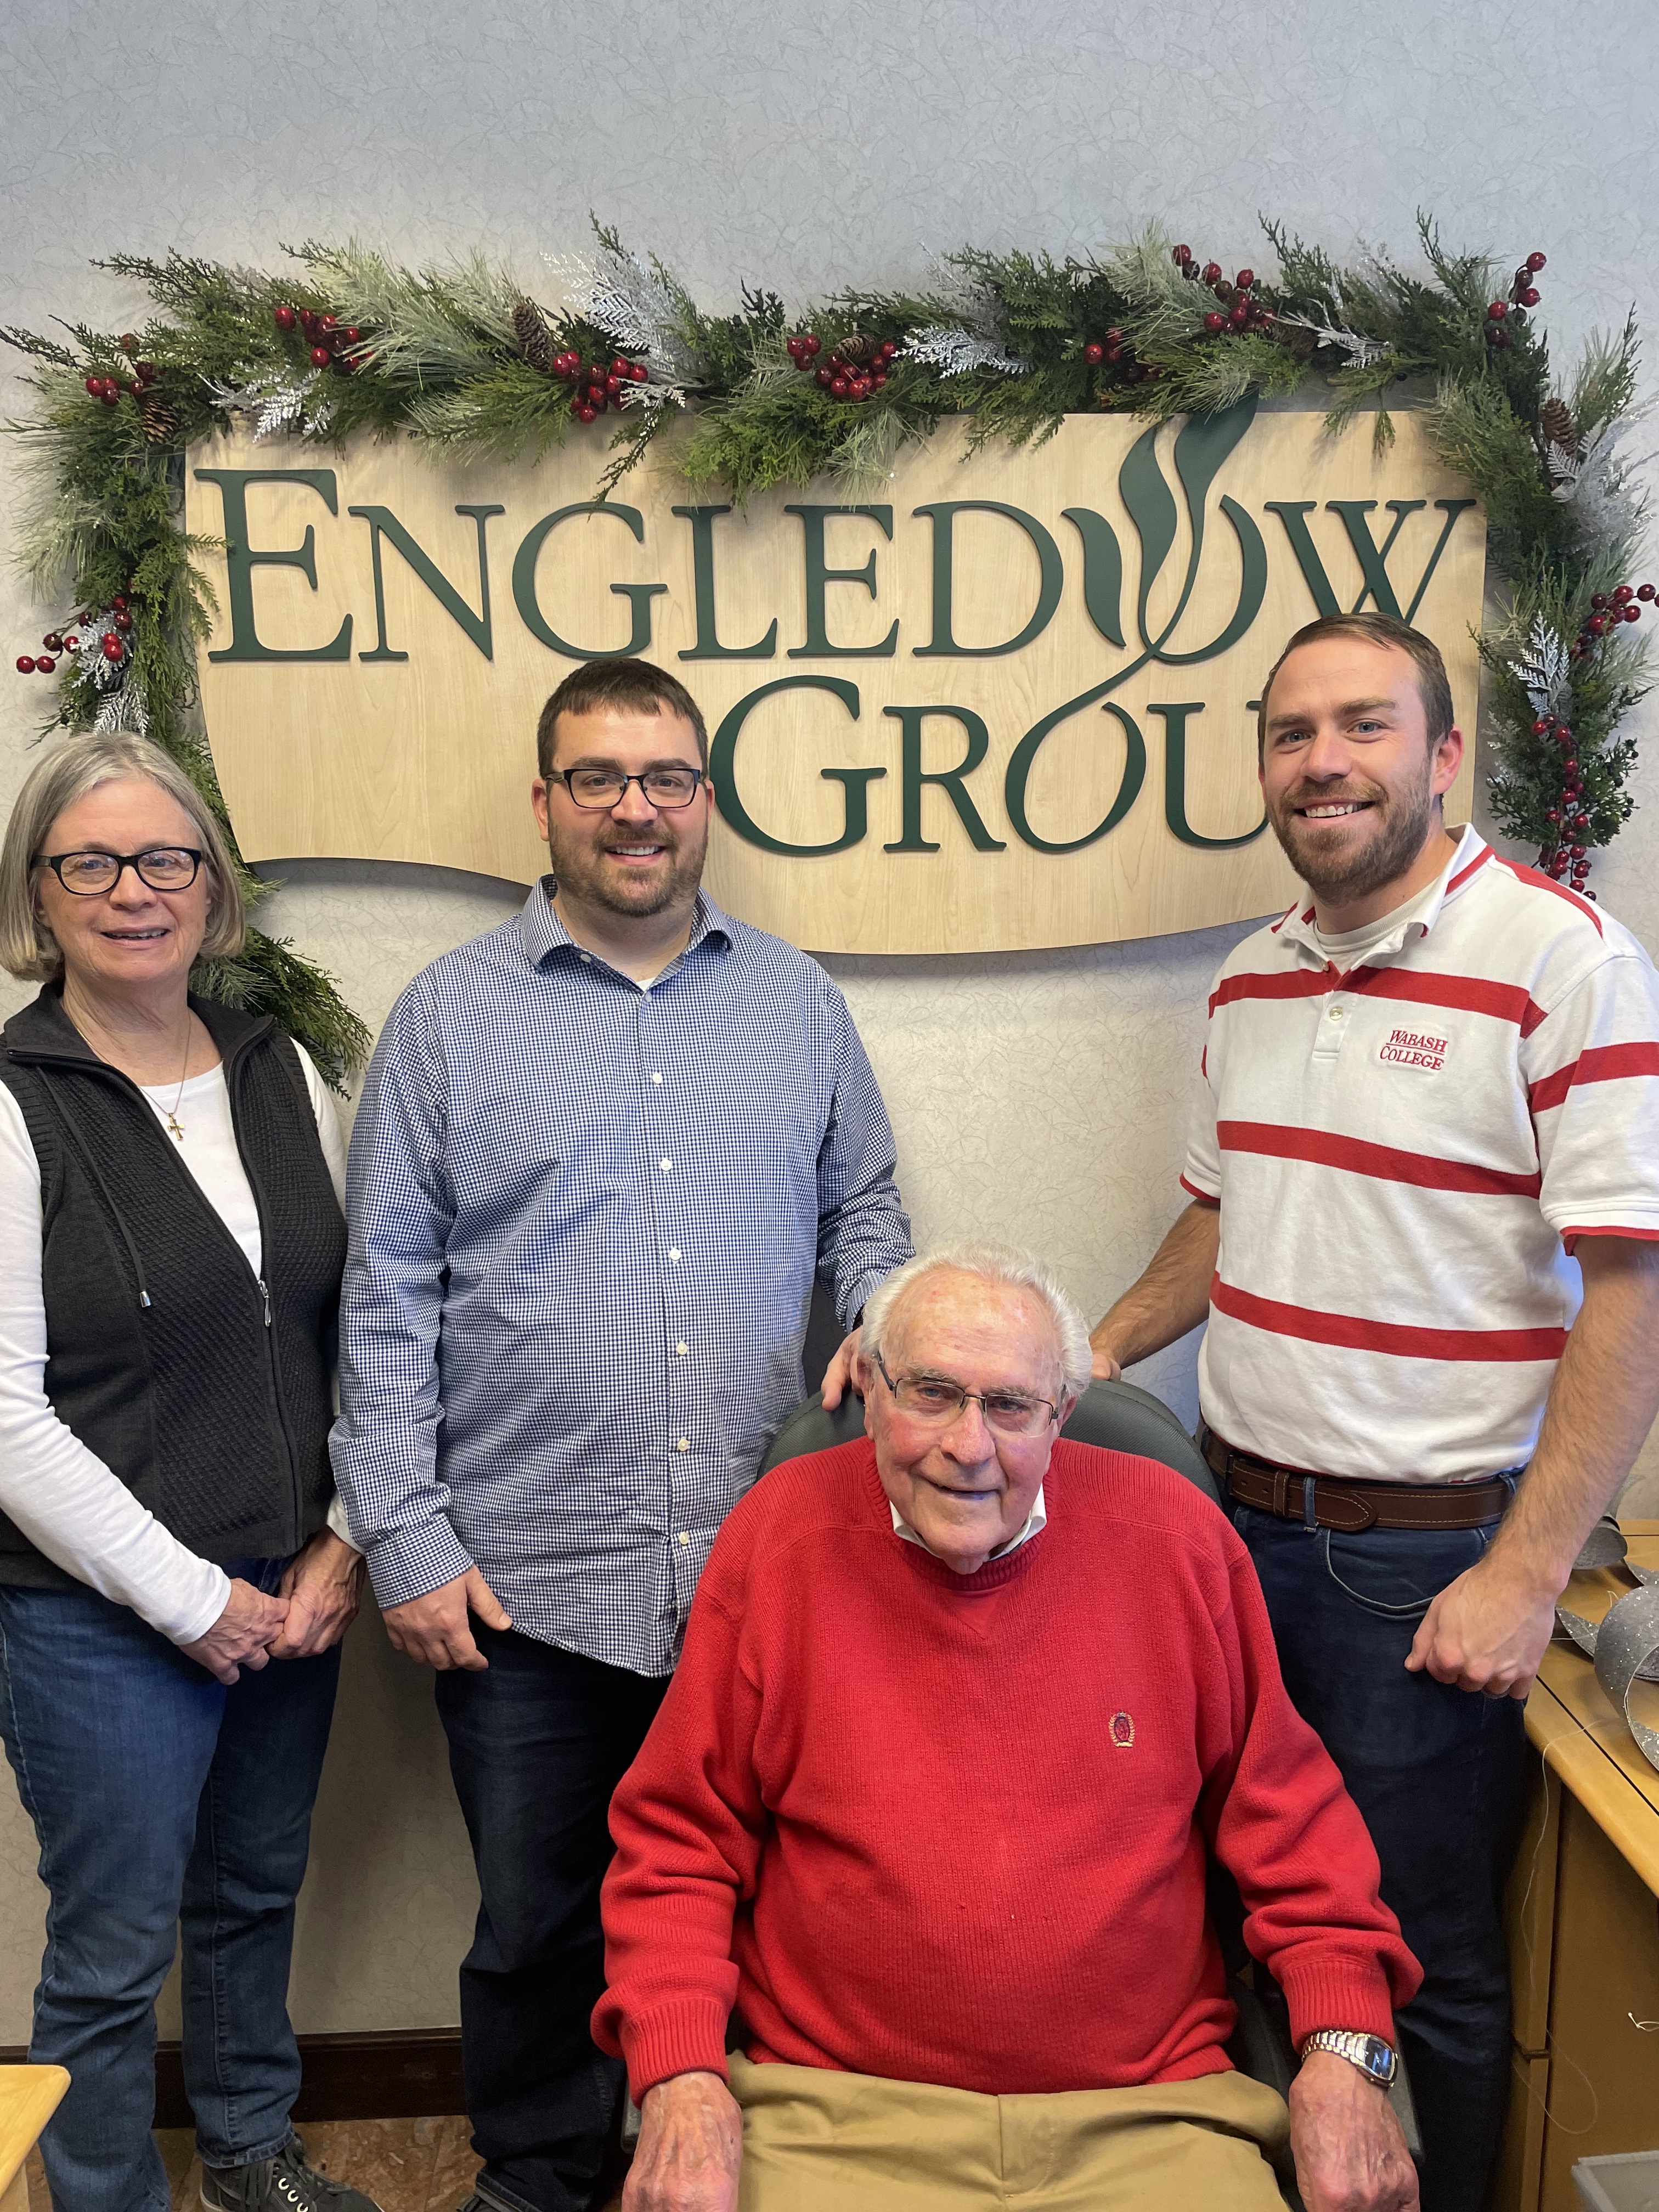 Elaine, Eric, Jack and Craig Engledow celebrate the creation of the Jim Engledow ’78 Memorial Scholarship at the Engledow Group office in Carmel.